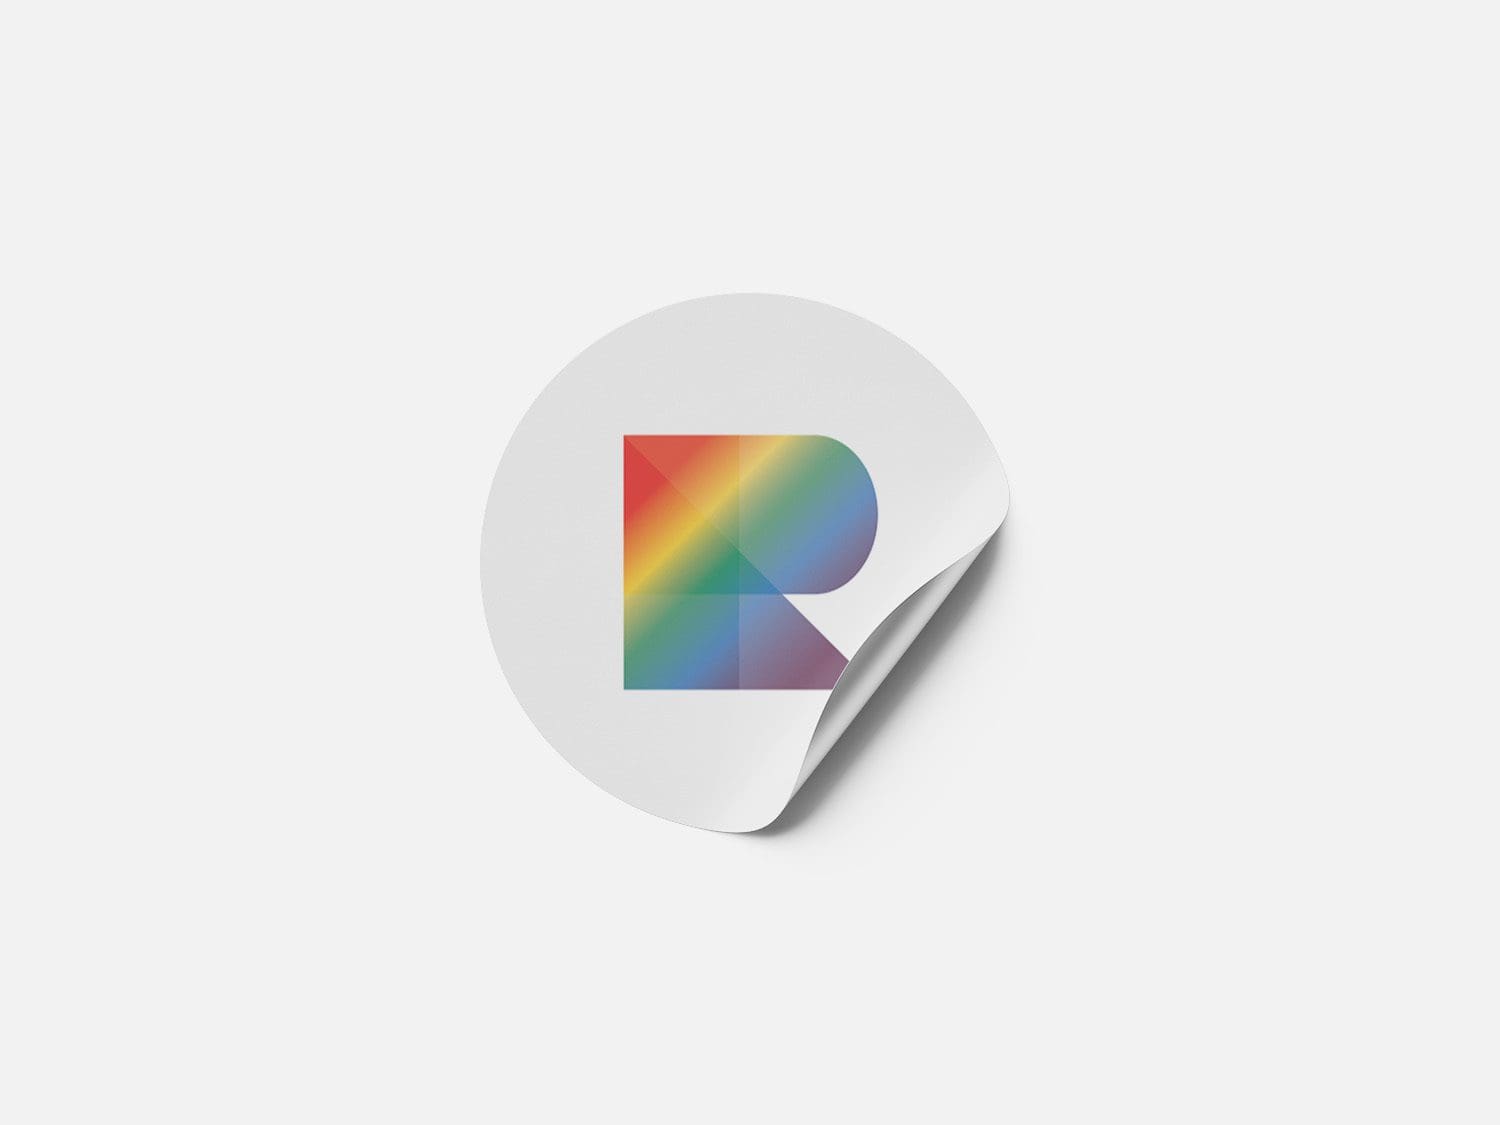 rainbow productions favicon logo shown on a white circle sticker on a white background. The corner of the sticker is curled up as if it has started to peel off the surface